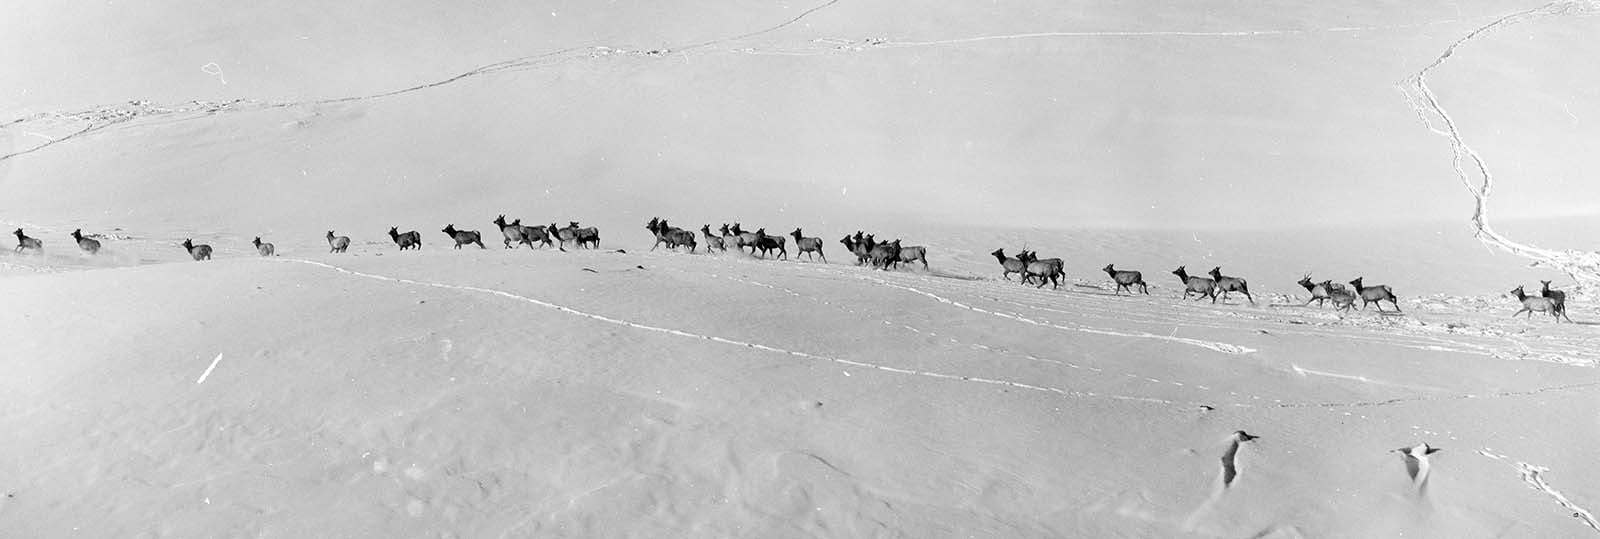 Aerial photo of herd of elk in snow in Yellowstone National Park, 1967. MS 89 Jack Richard Photograph Collection, McCracken Research Library. PN.89.45.9488.12